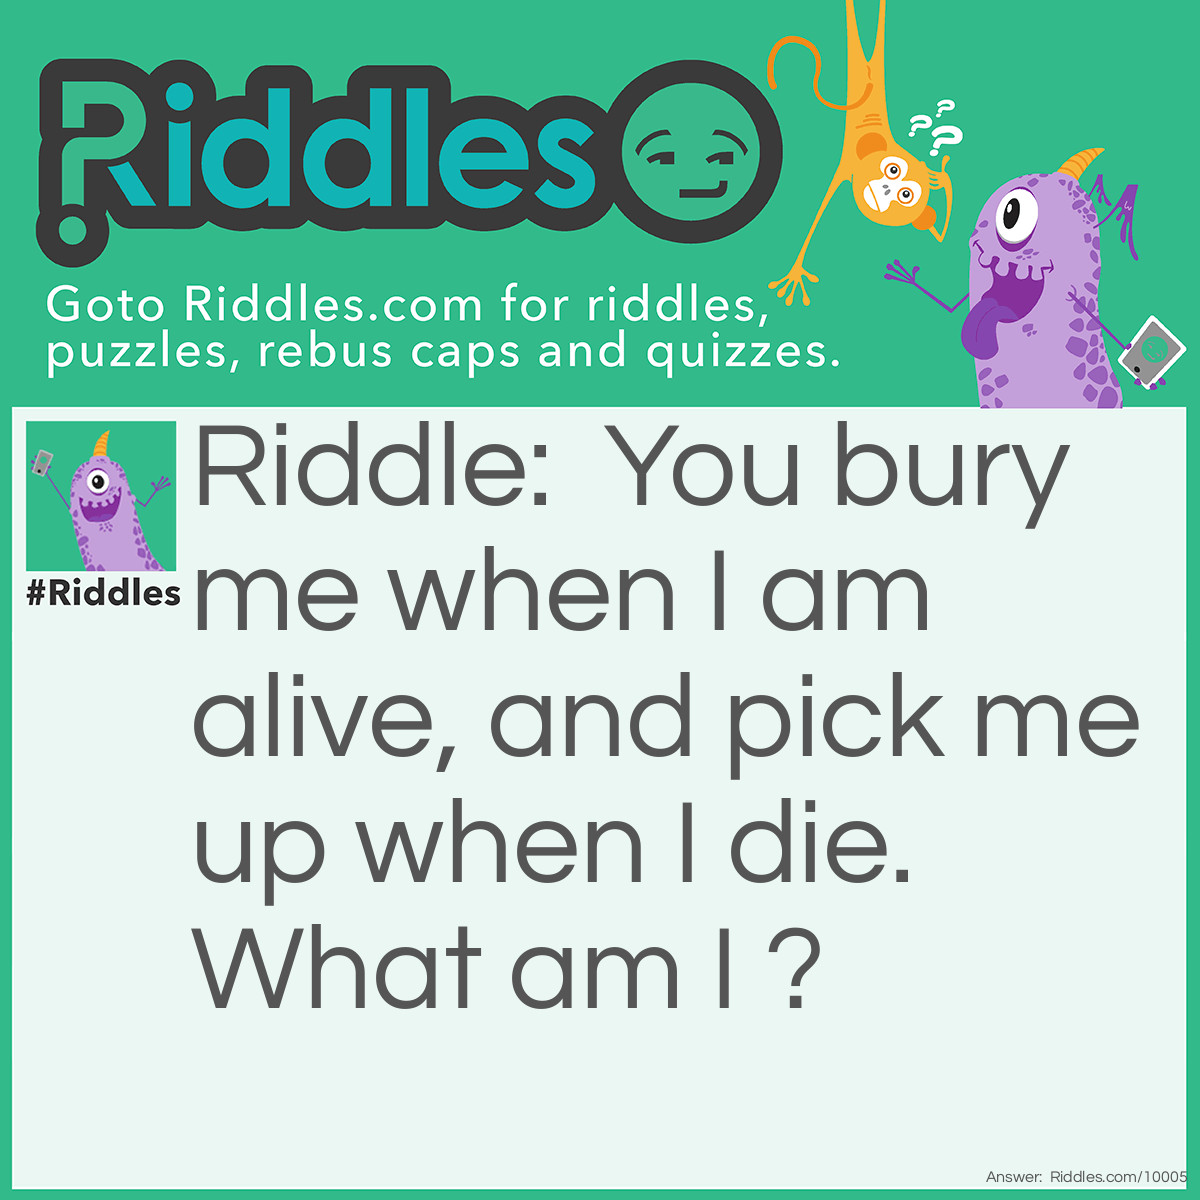 Riddle: You bury me when I am alive, and pick me up when I die. What am I ? Answer: A plant.